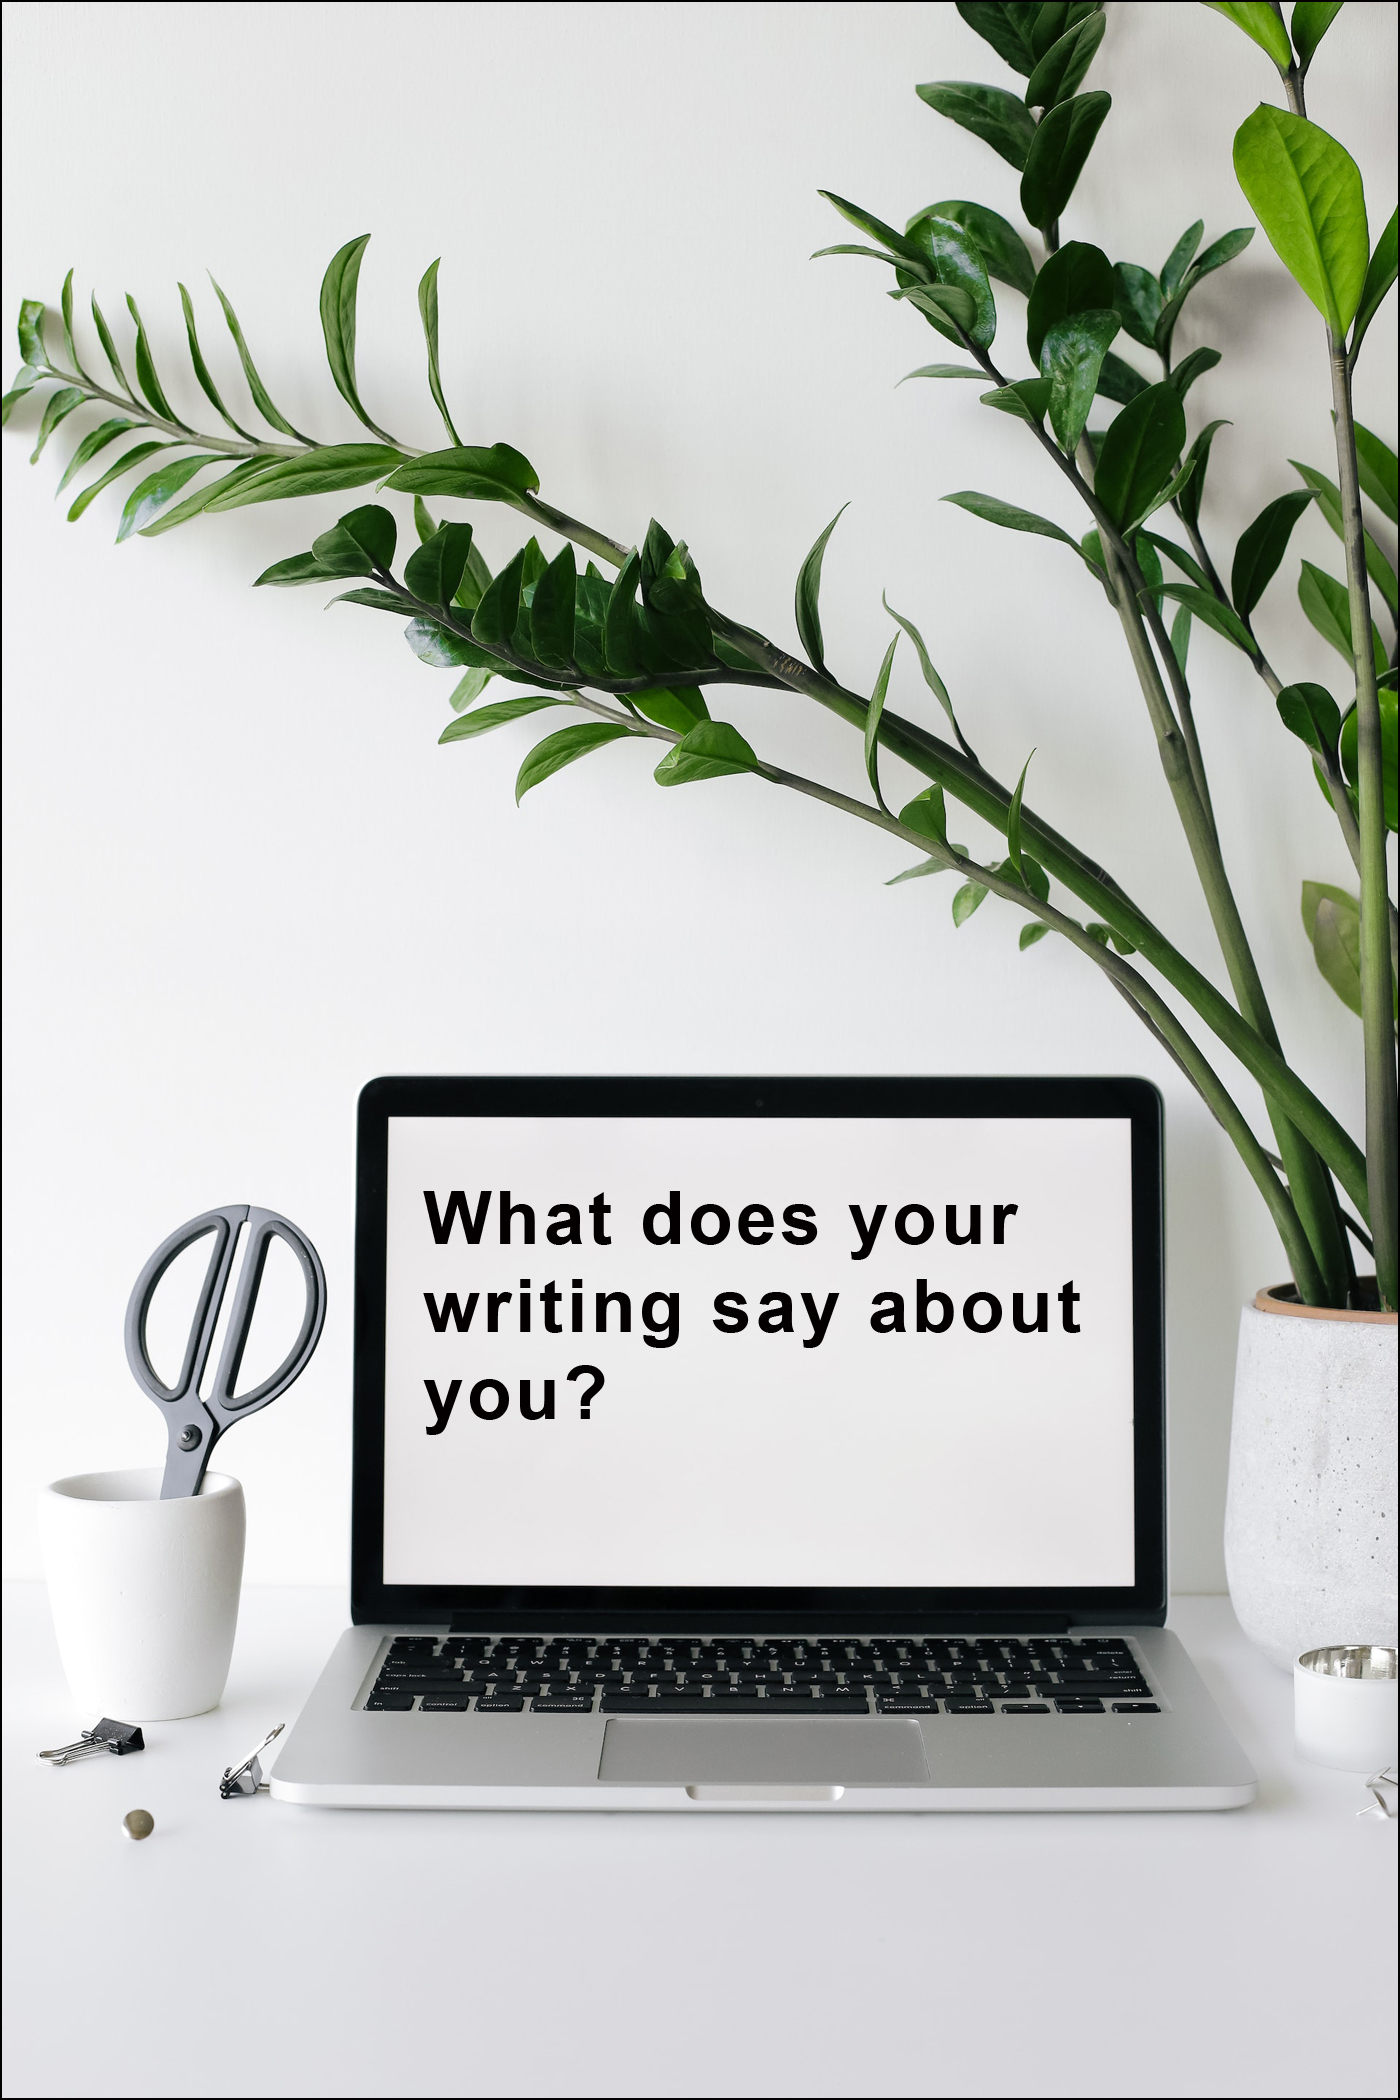 Laptop computer on desk with plant. Screen reads "What does your writing say about you?"